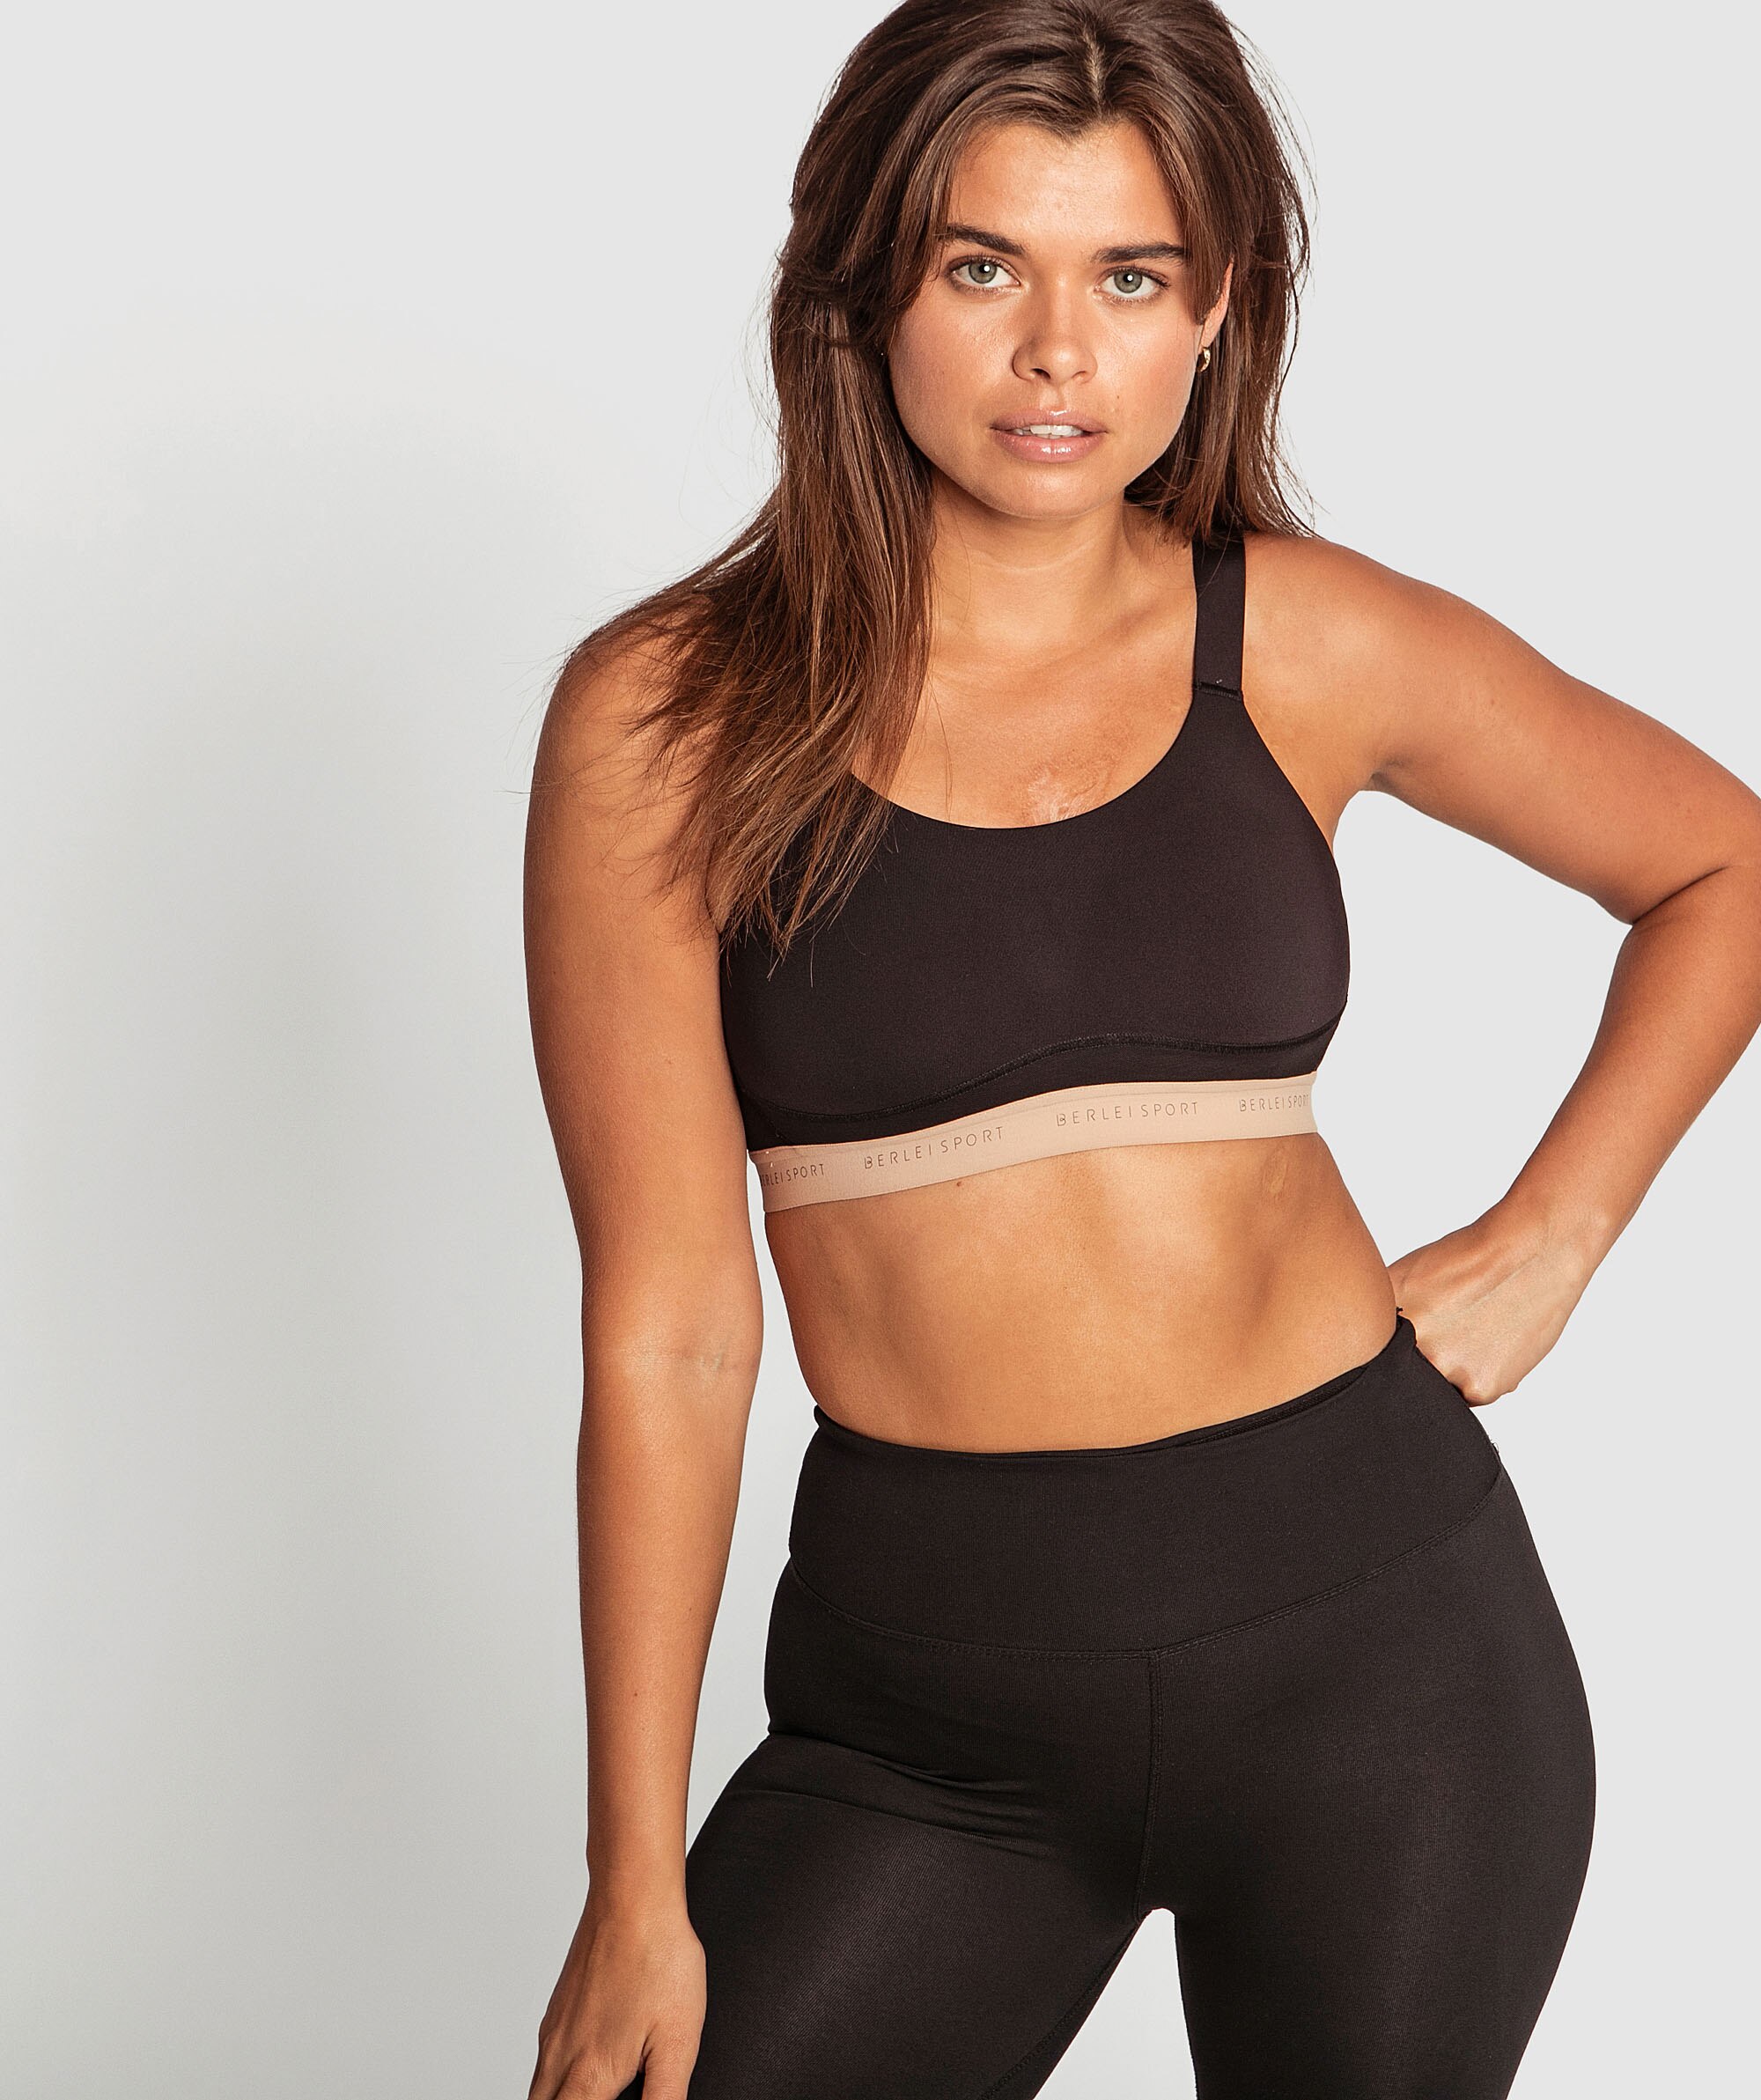 EMPOW-HER WIREFREE CROP BLACK/NUDE